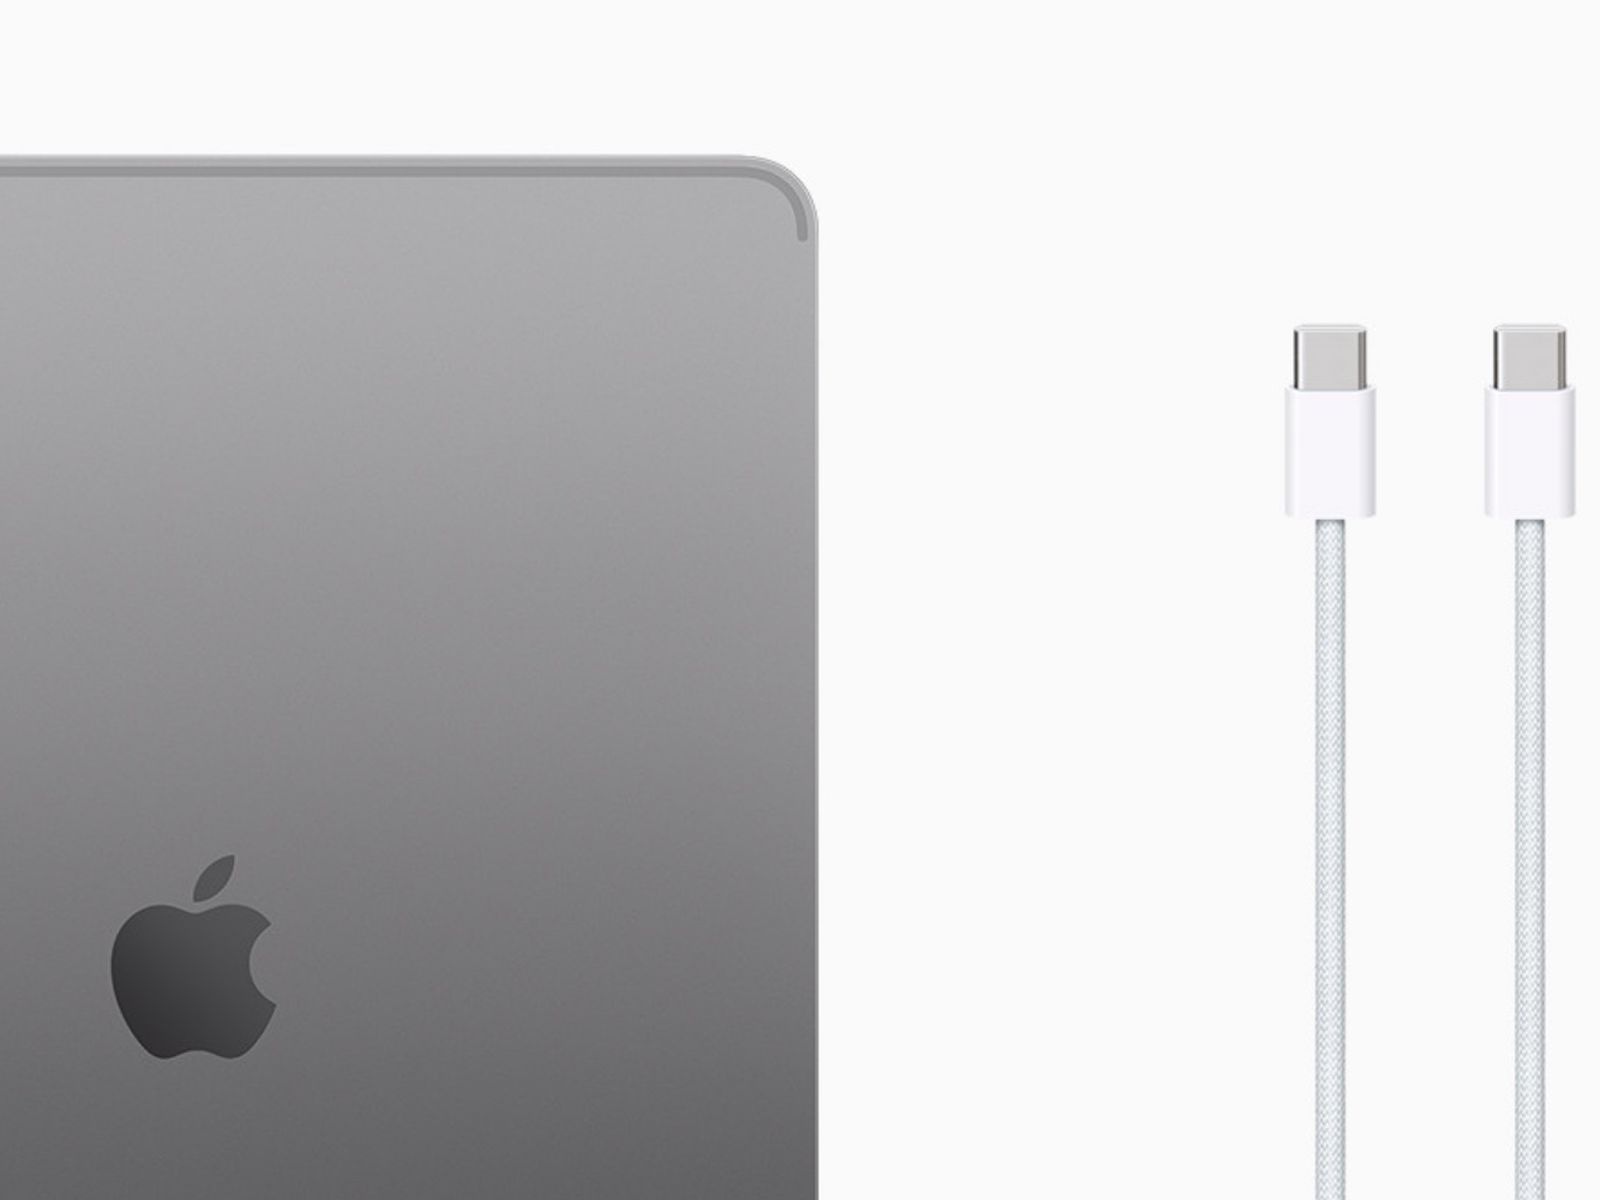 Original Apple USB-C Woven Charge Cable for iPad Pro